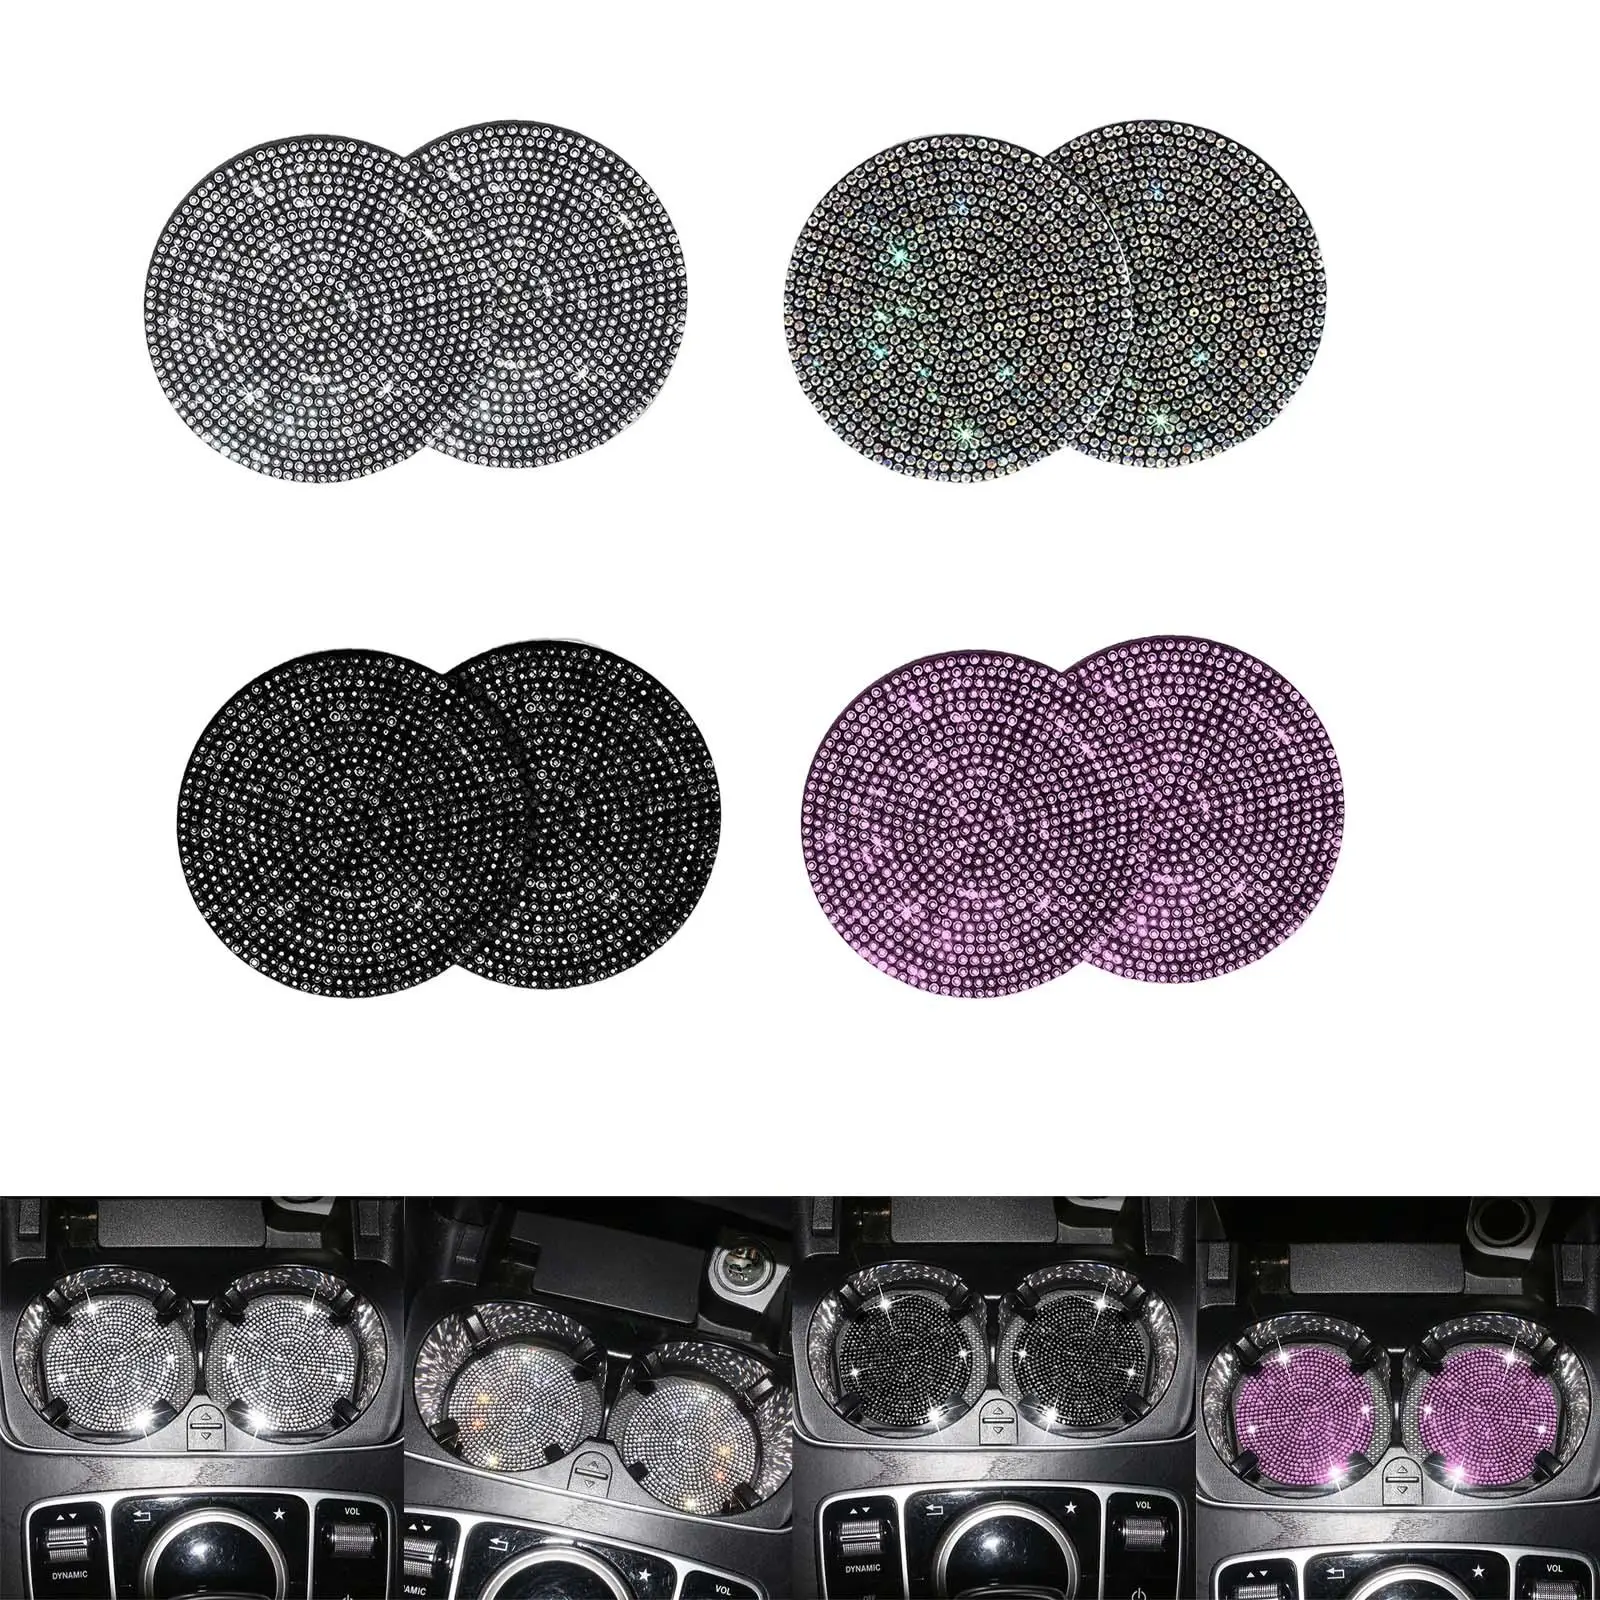 2x Bling Car Cup Holder Coaster Crystal Rhinestone Automobile 2.76 inch Luxury Most Cars Auto Anti Slip Mat Pad for Women Men